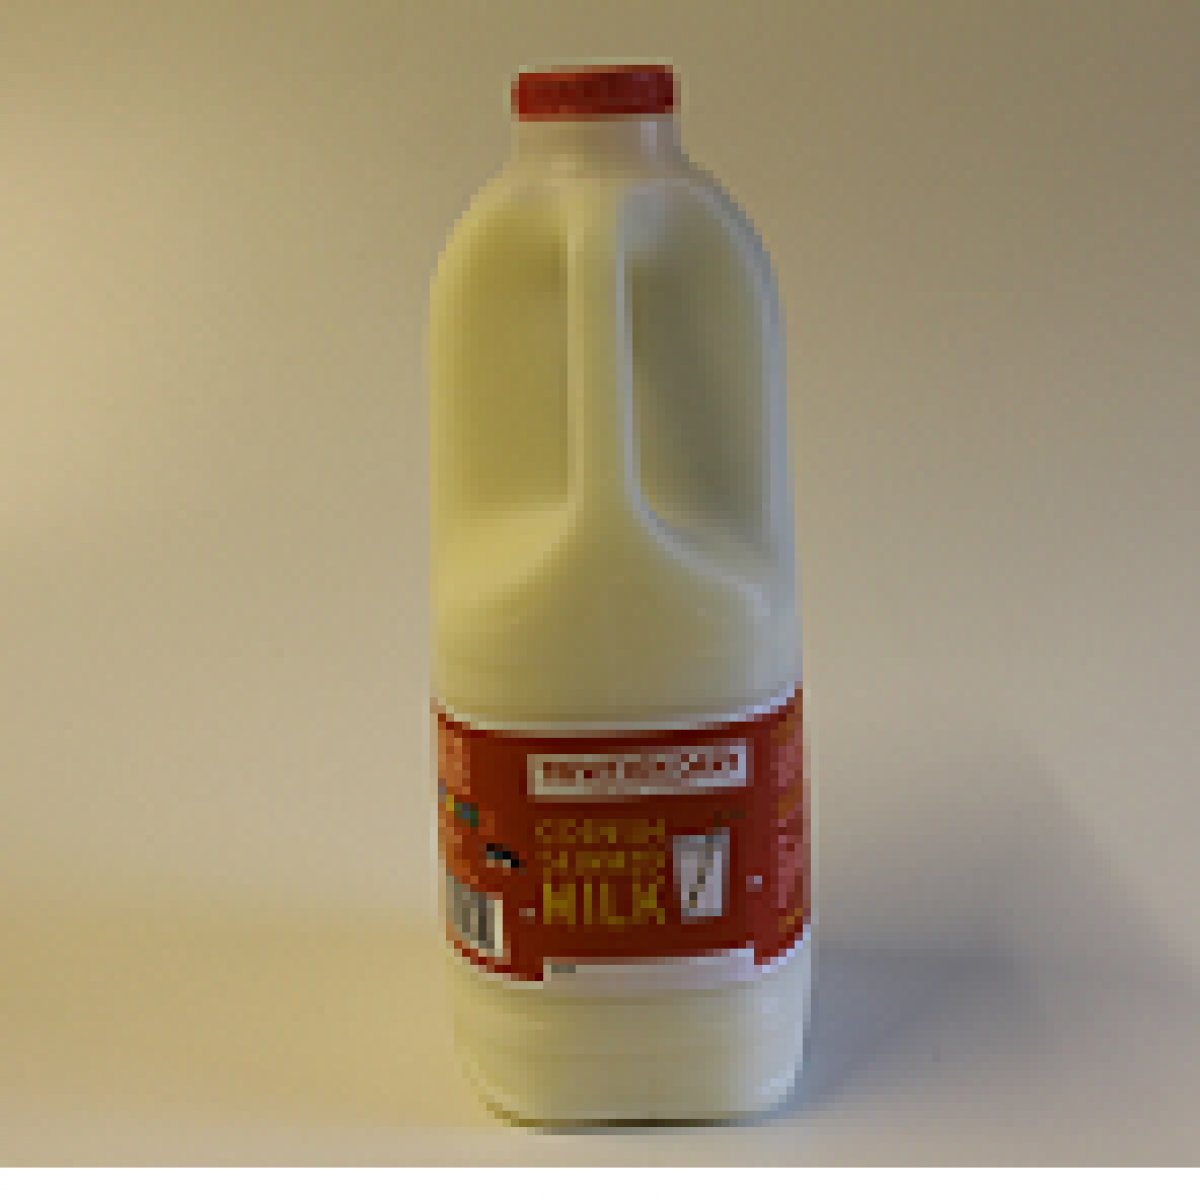 Product picture for Organic 1 Litre Skimmed Milk